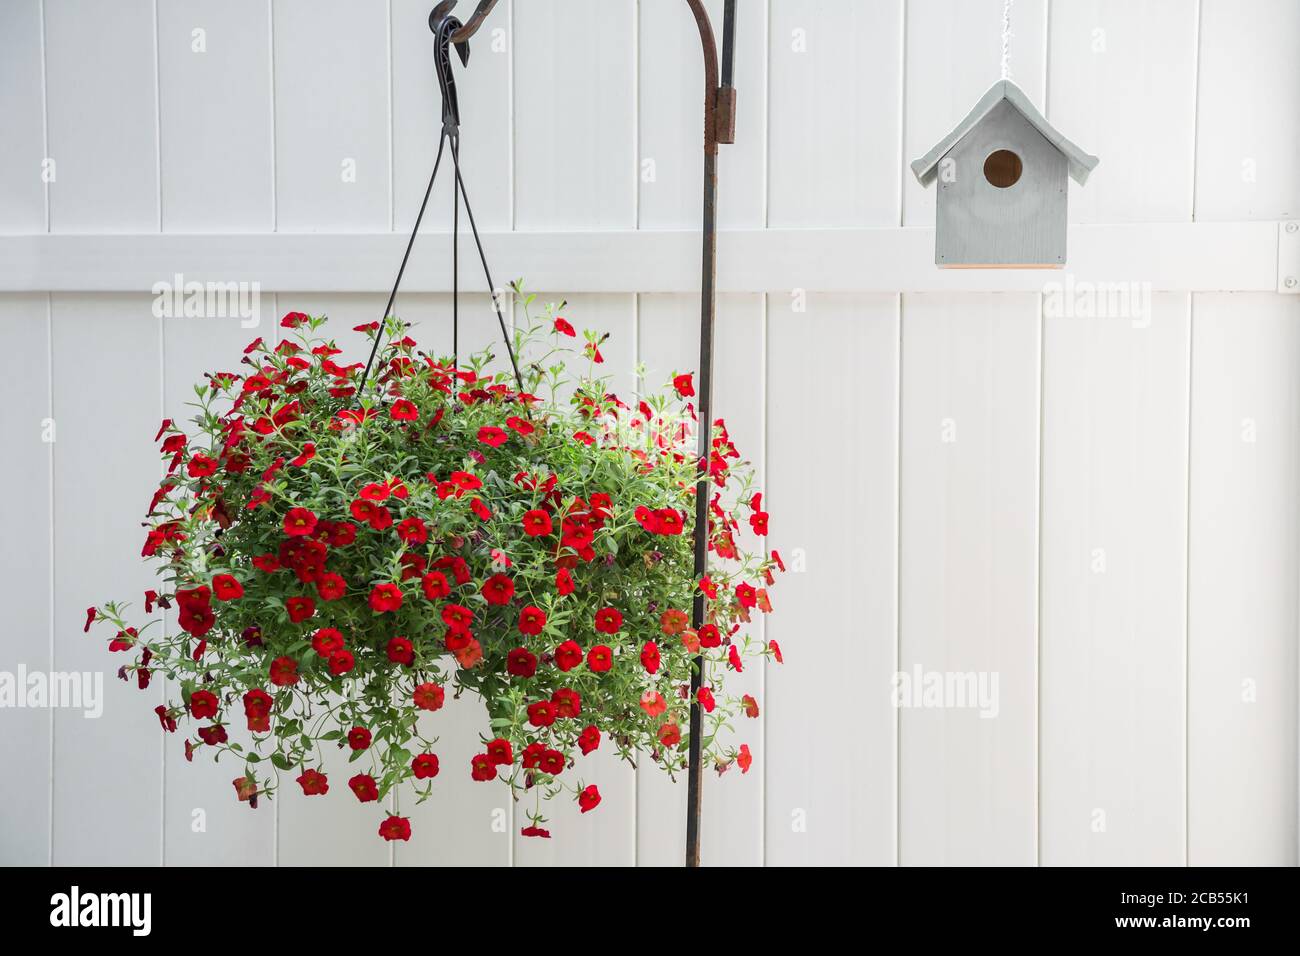 Mini petunias aka million bells and a weathered bird house against a white fence. Stock Photo